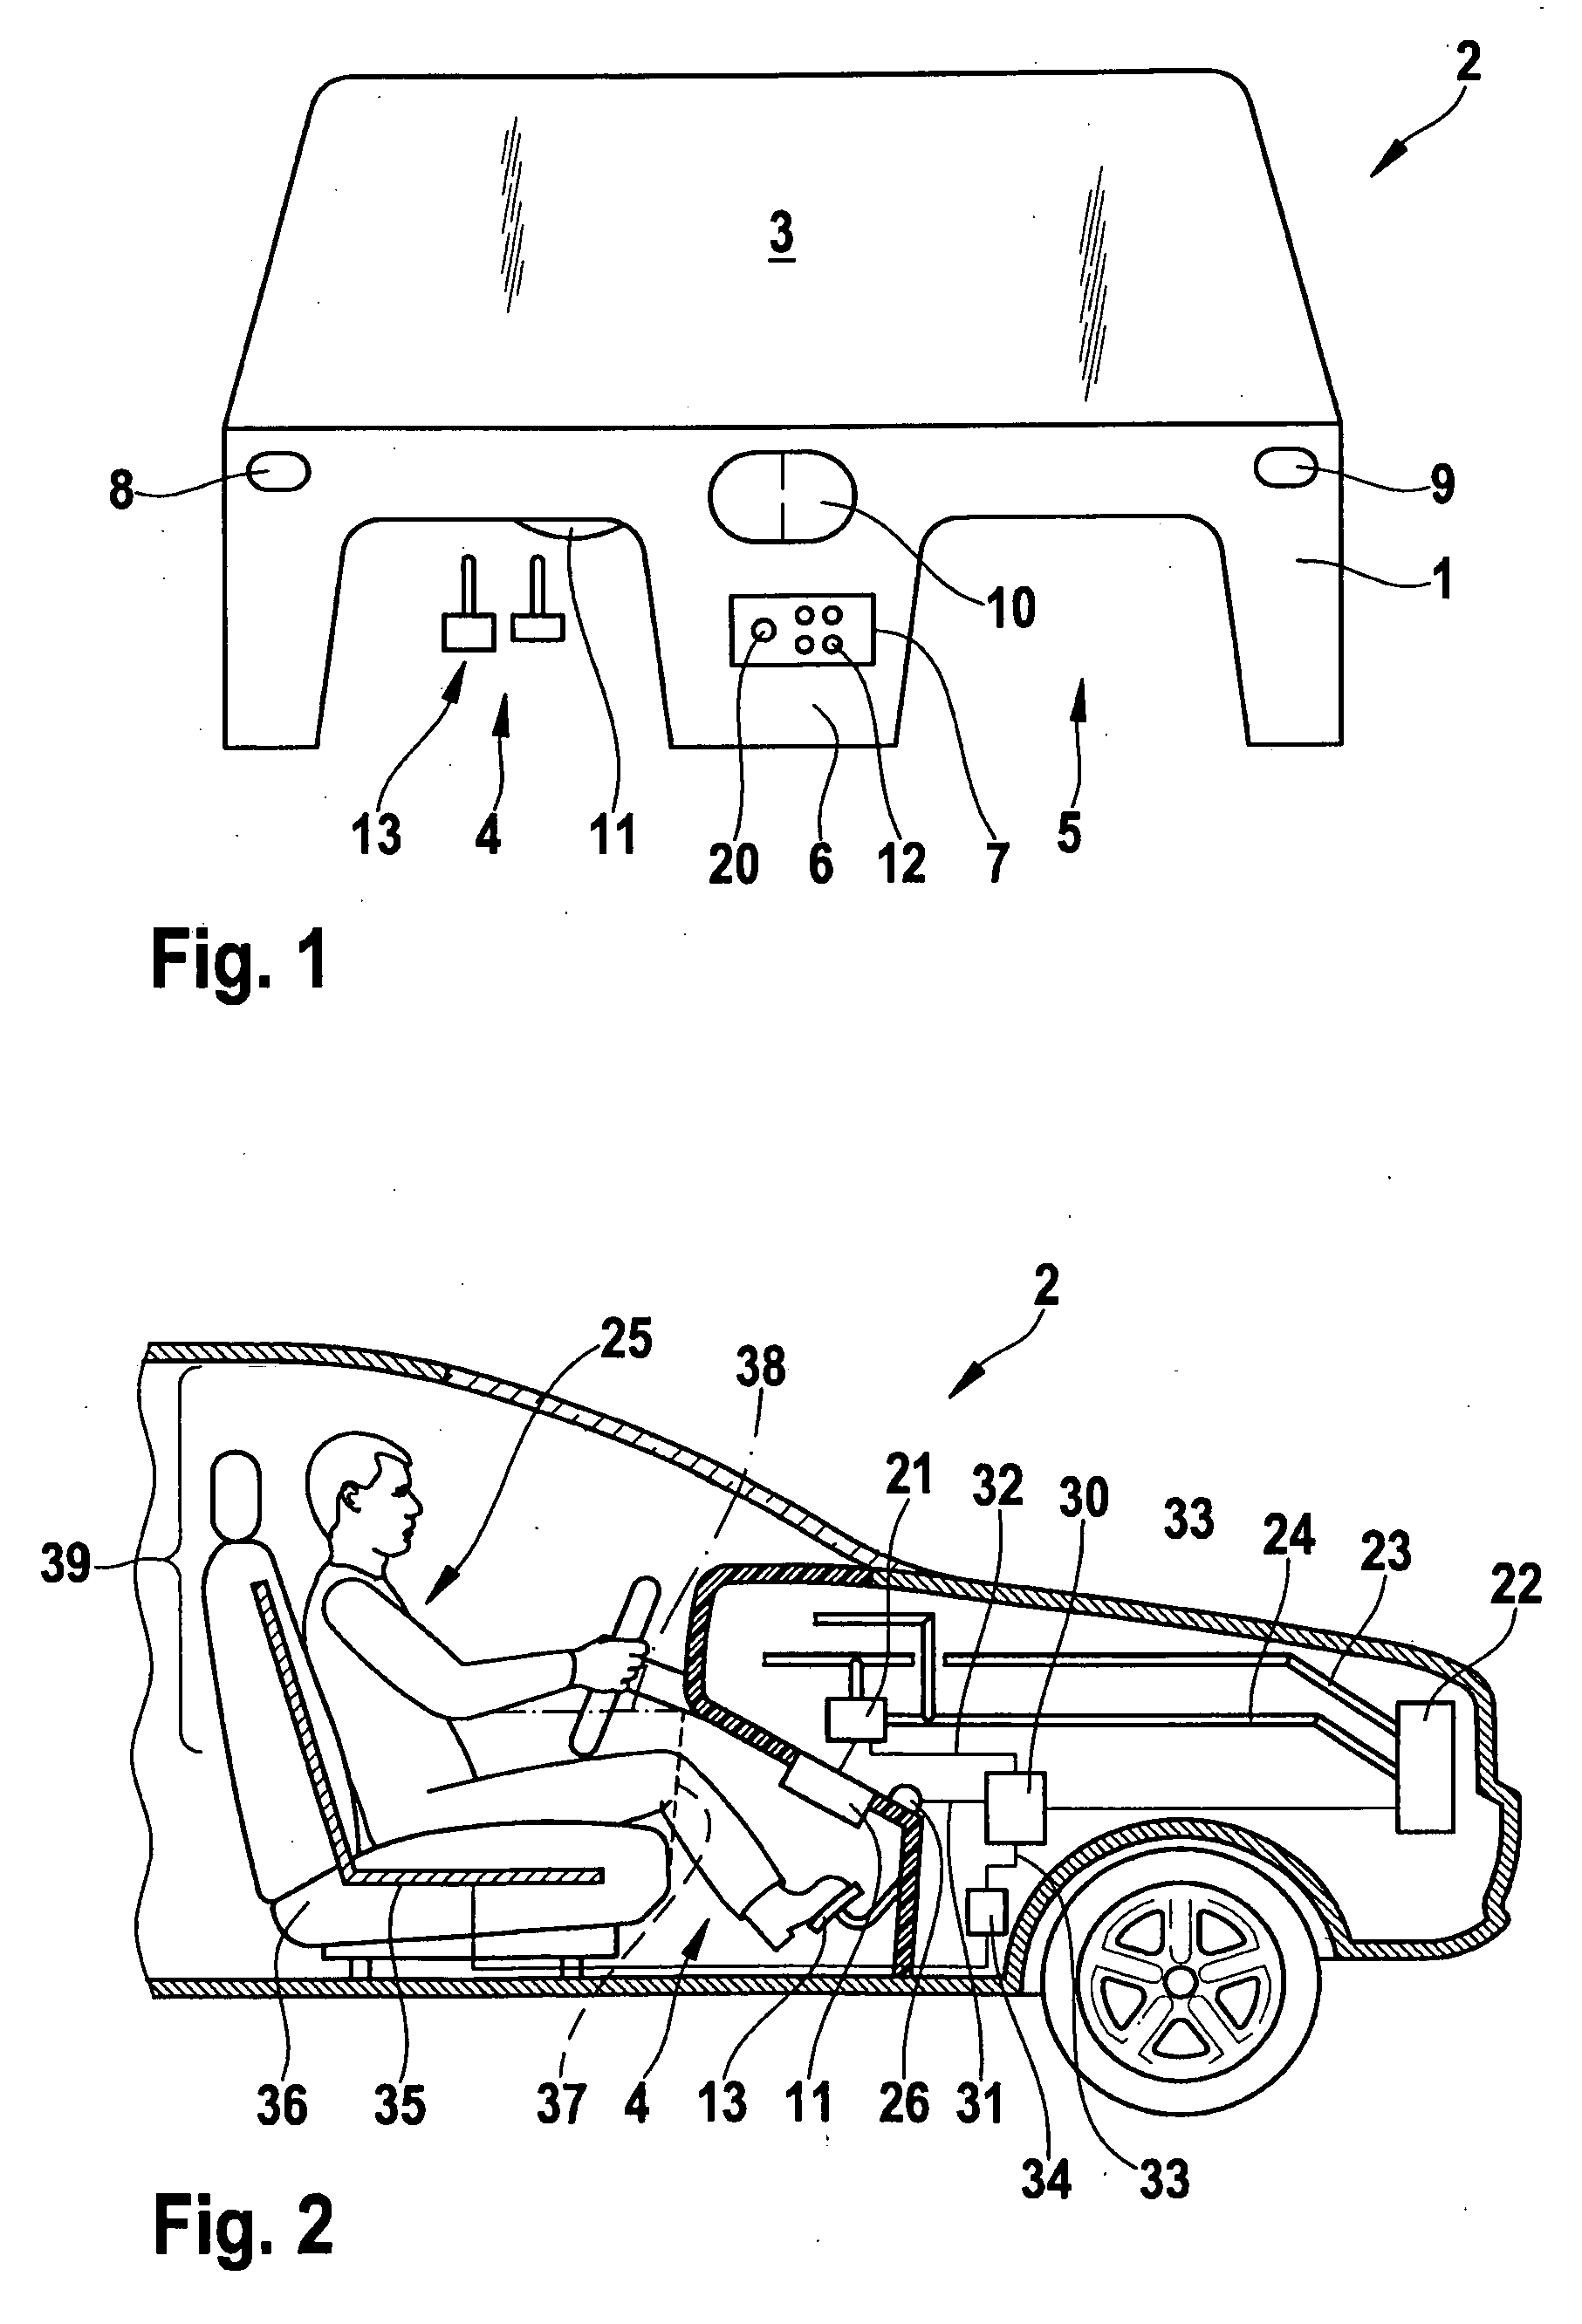 Device and Method for Climate Control